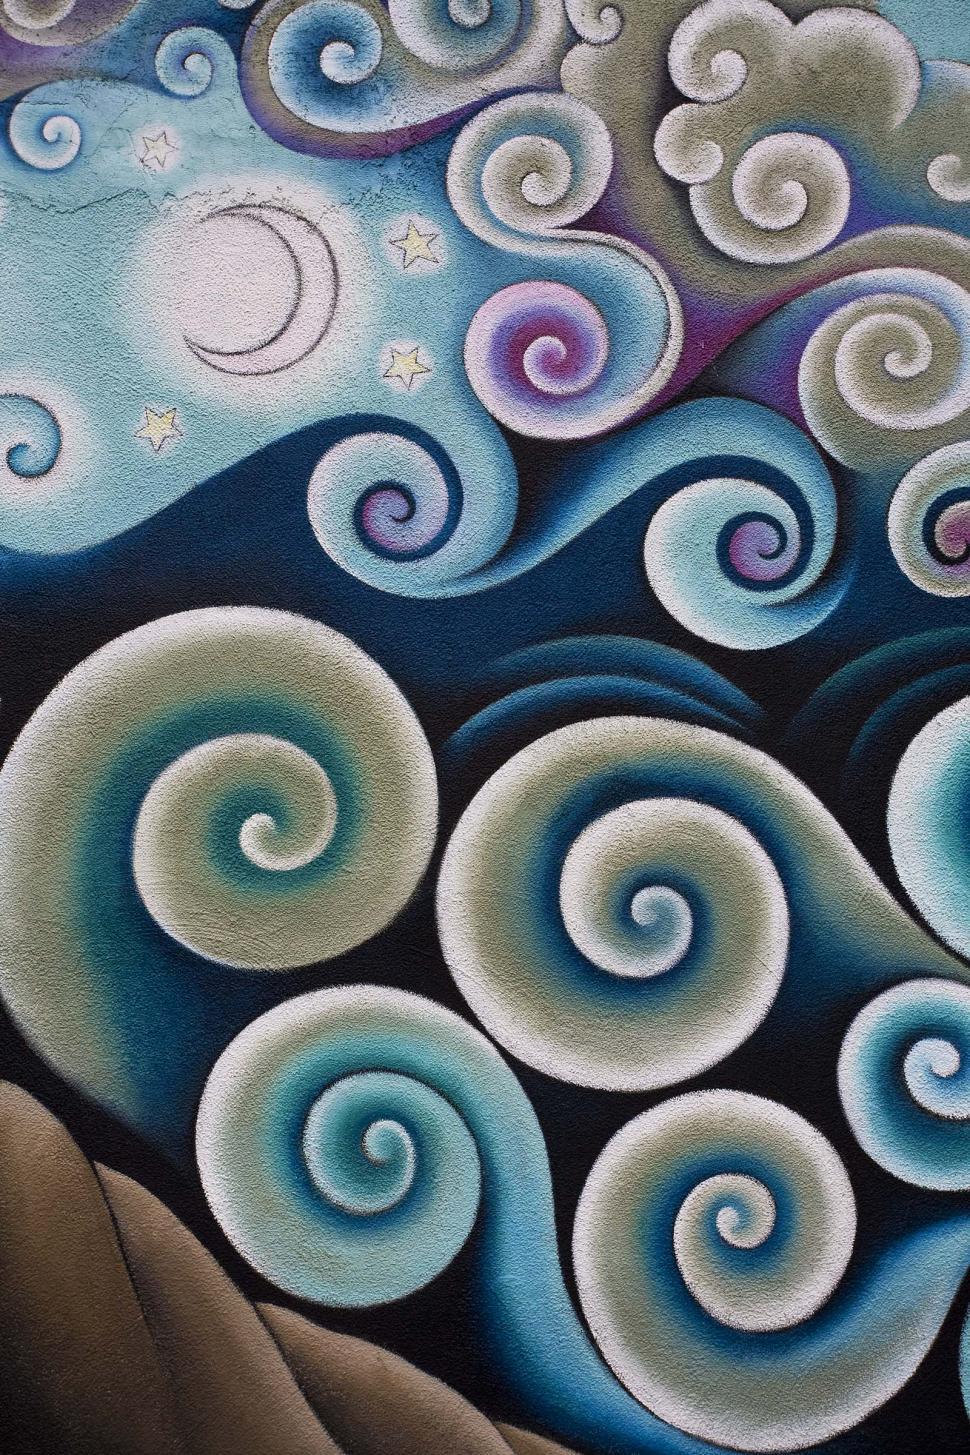 Free Image of Wall of painted spirals 